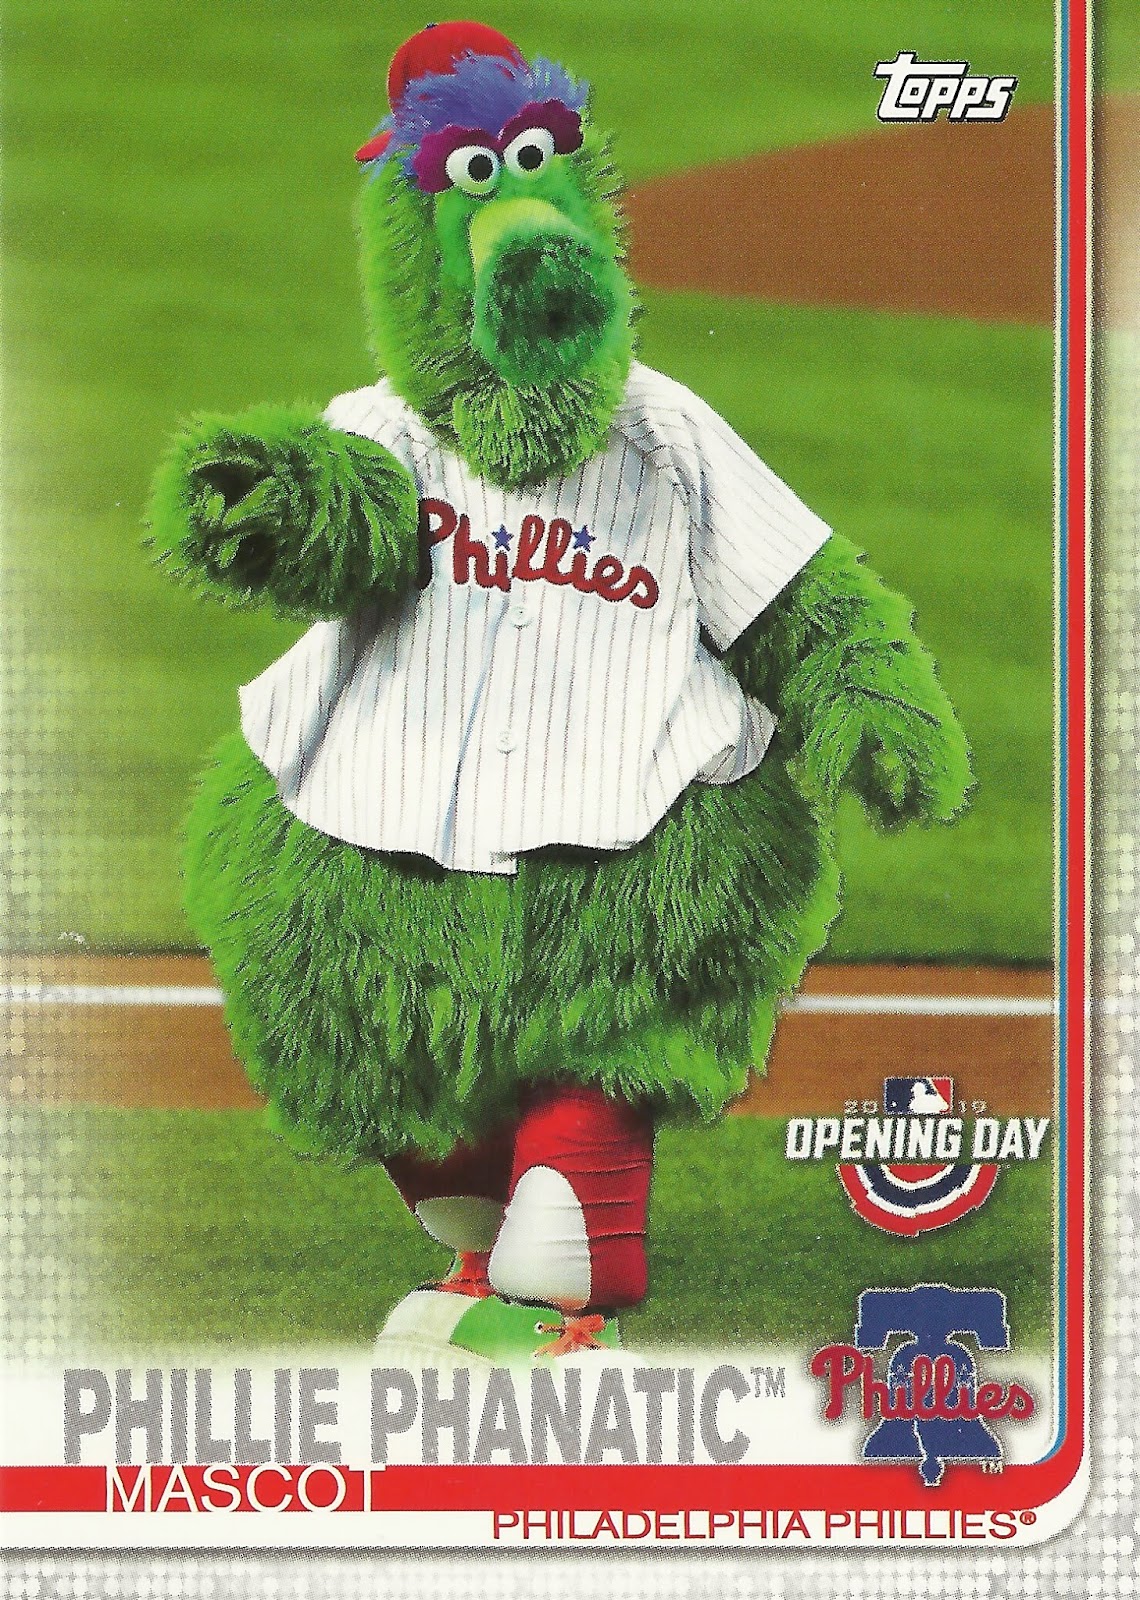 Phillie Phanatic Lawsuit Explained: Why the Phillies Have Changed